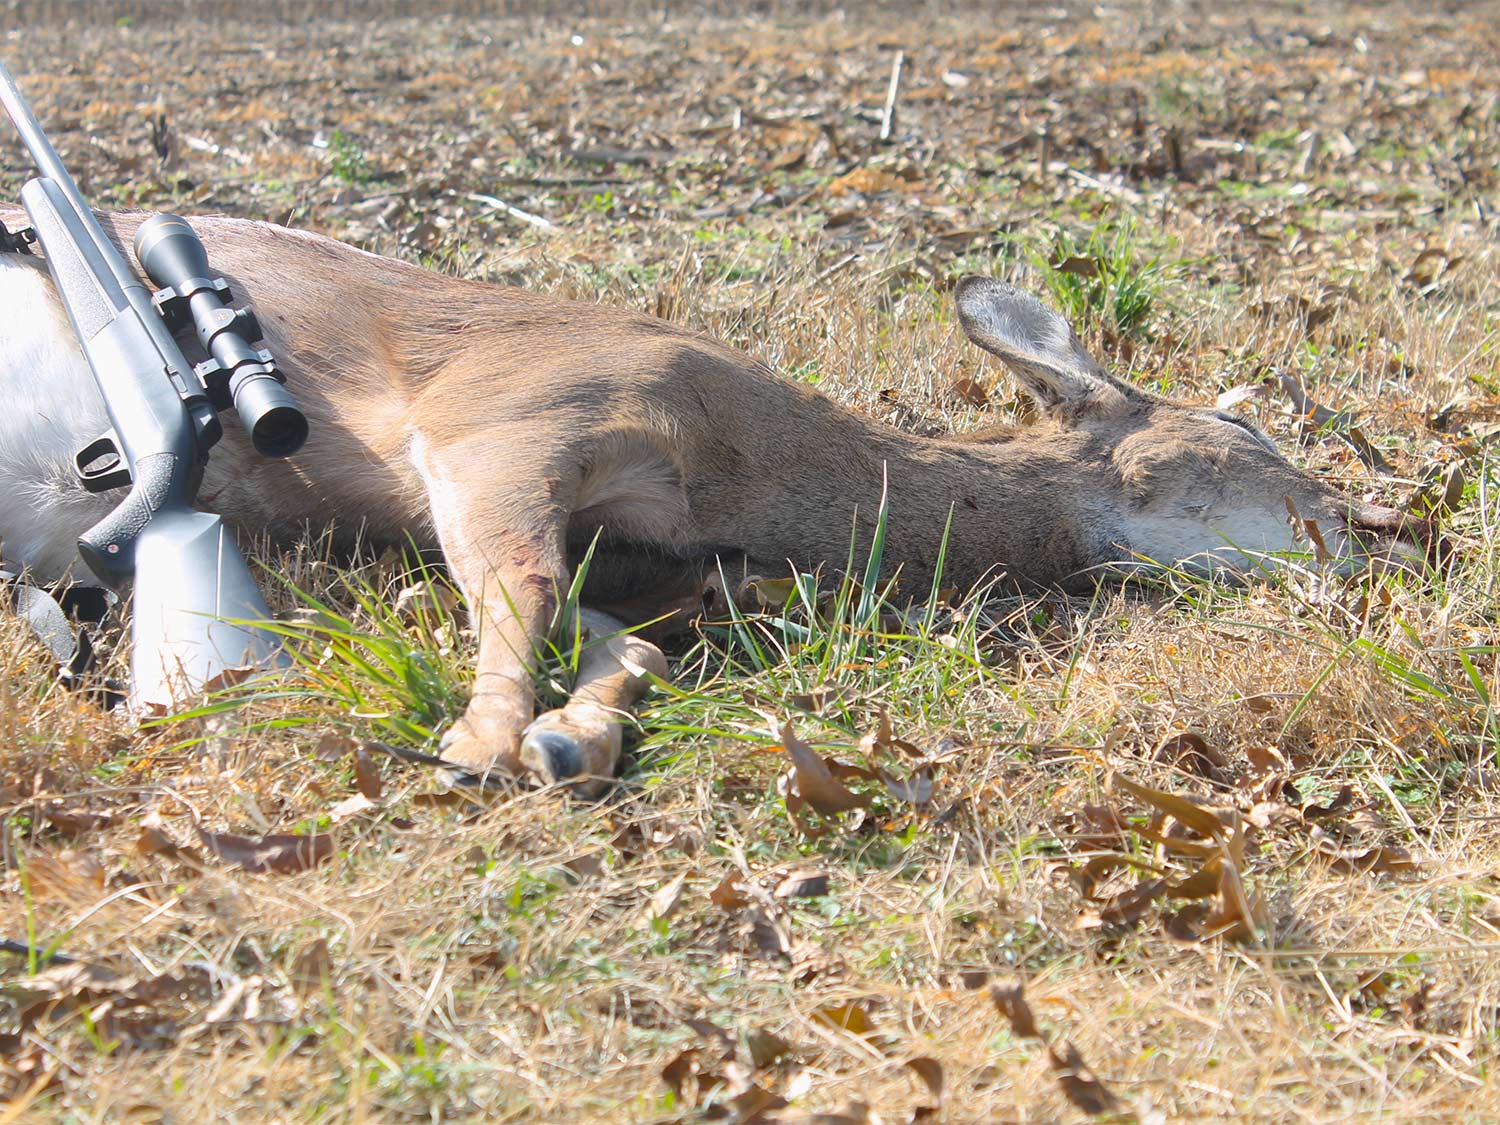 A whitetail deer on the ground.